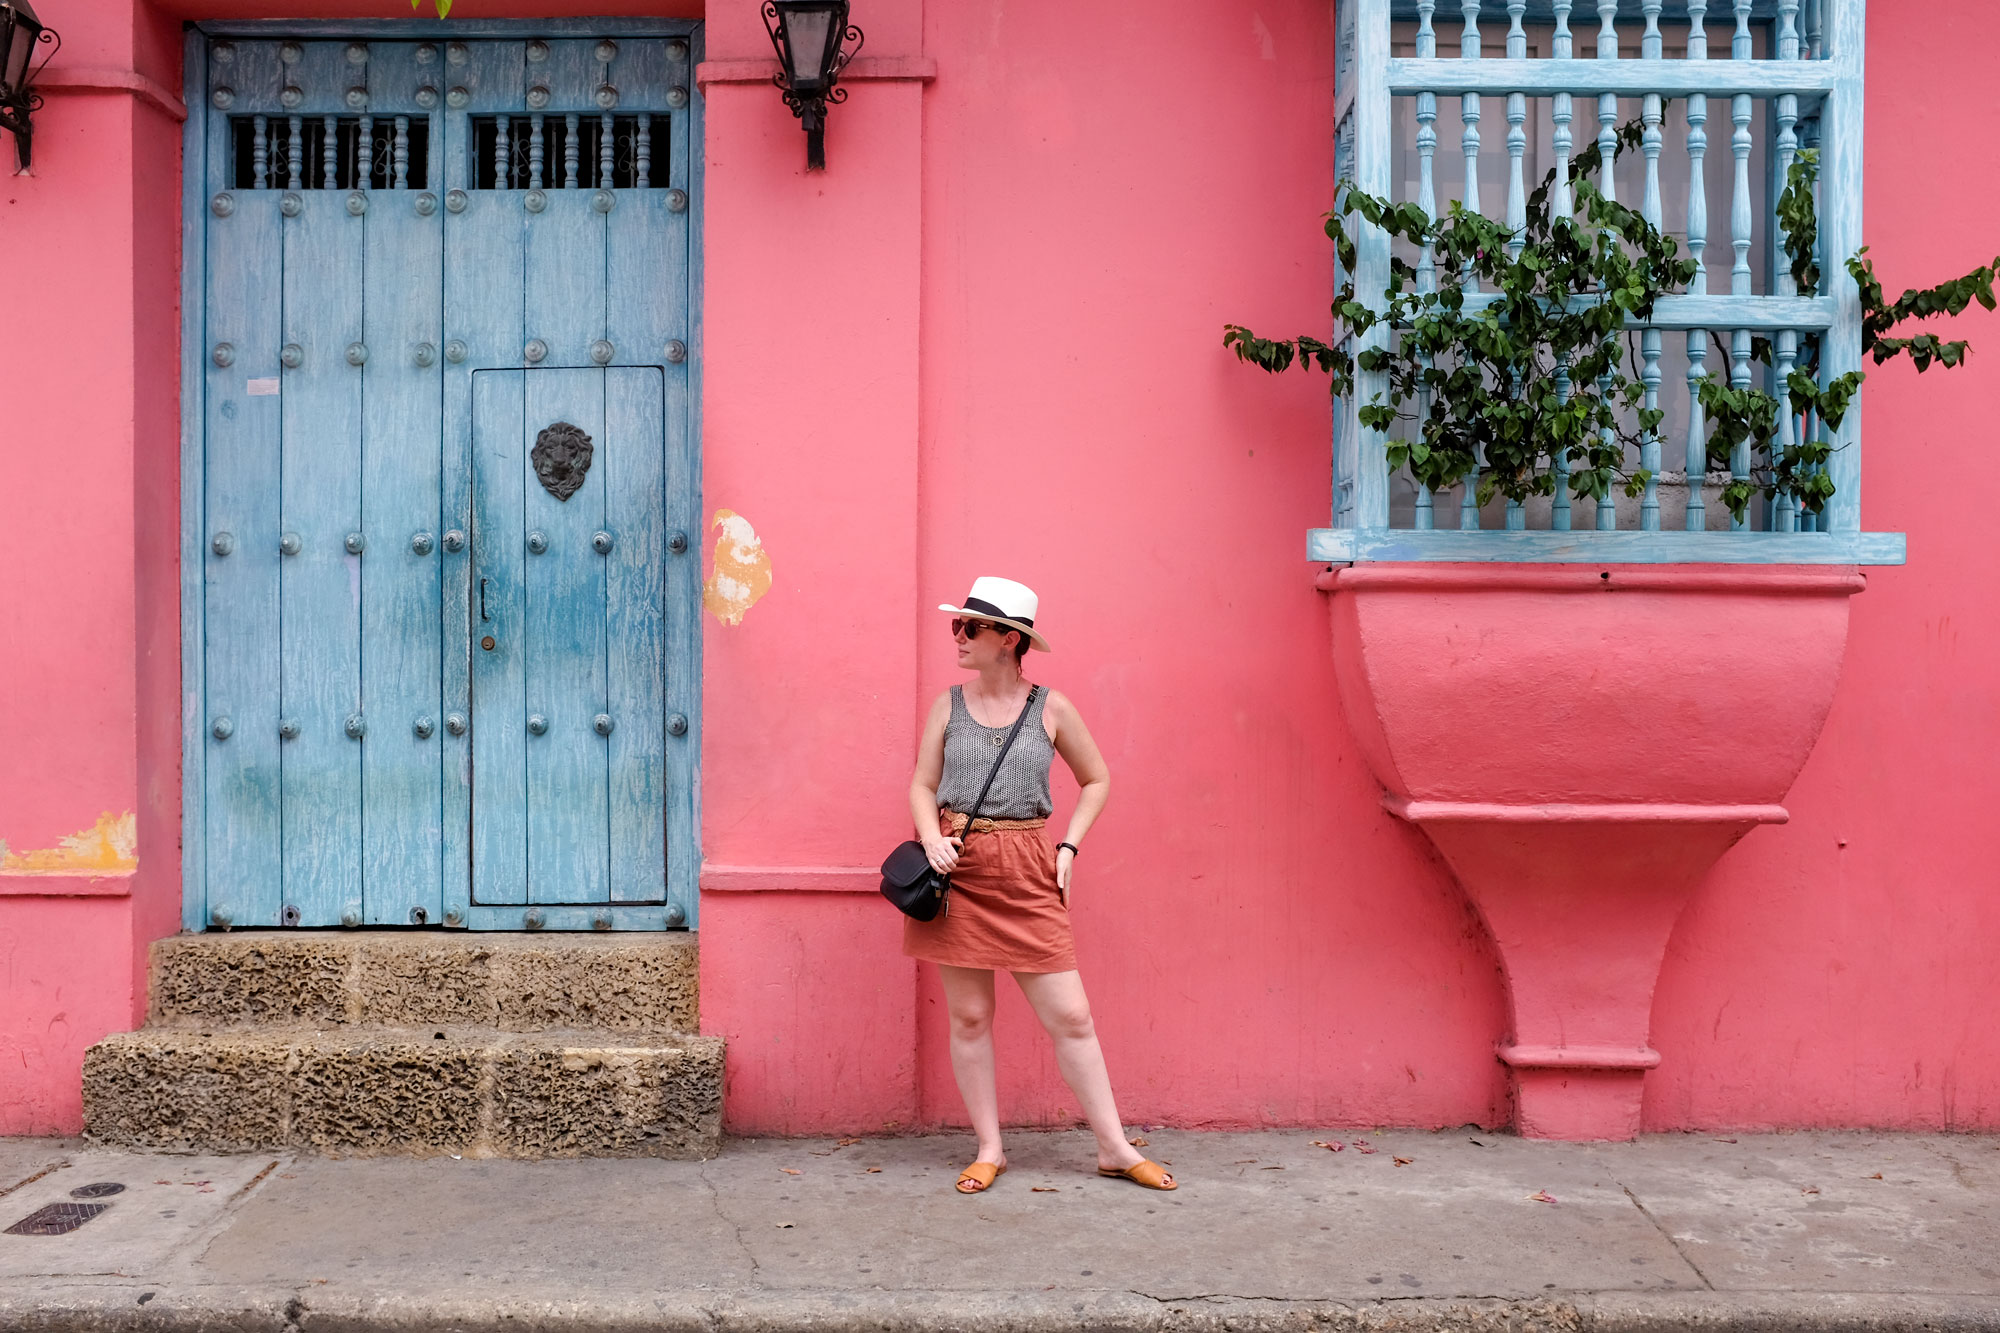 Krystal standing in front of a bright pink wall in Cartagena